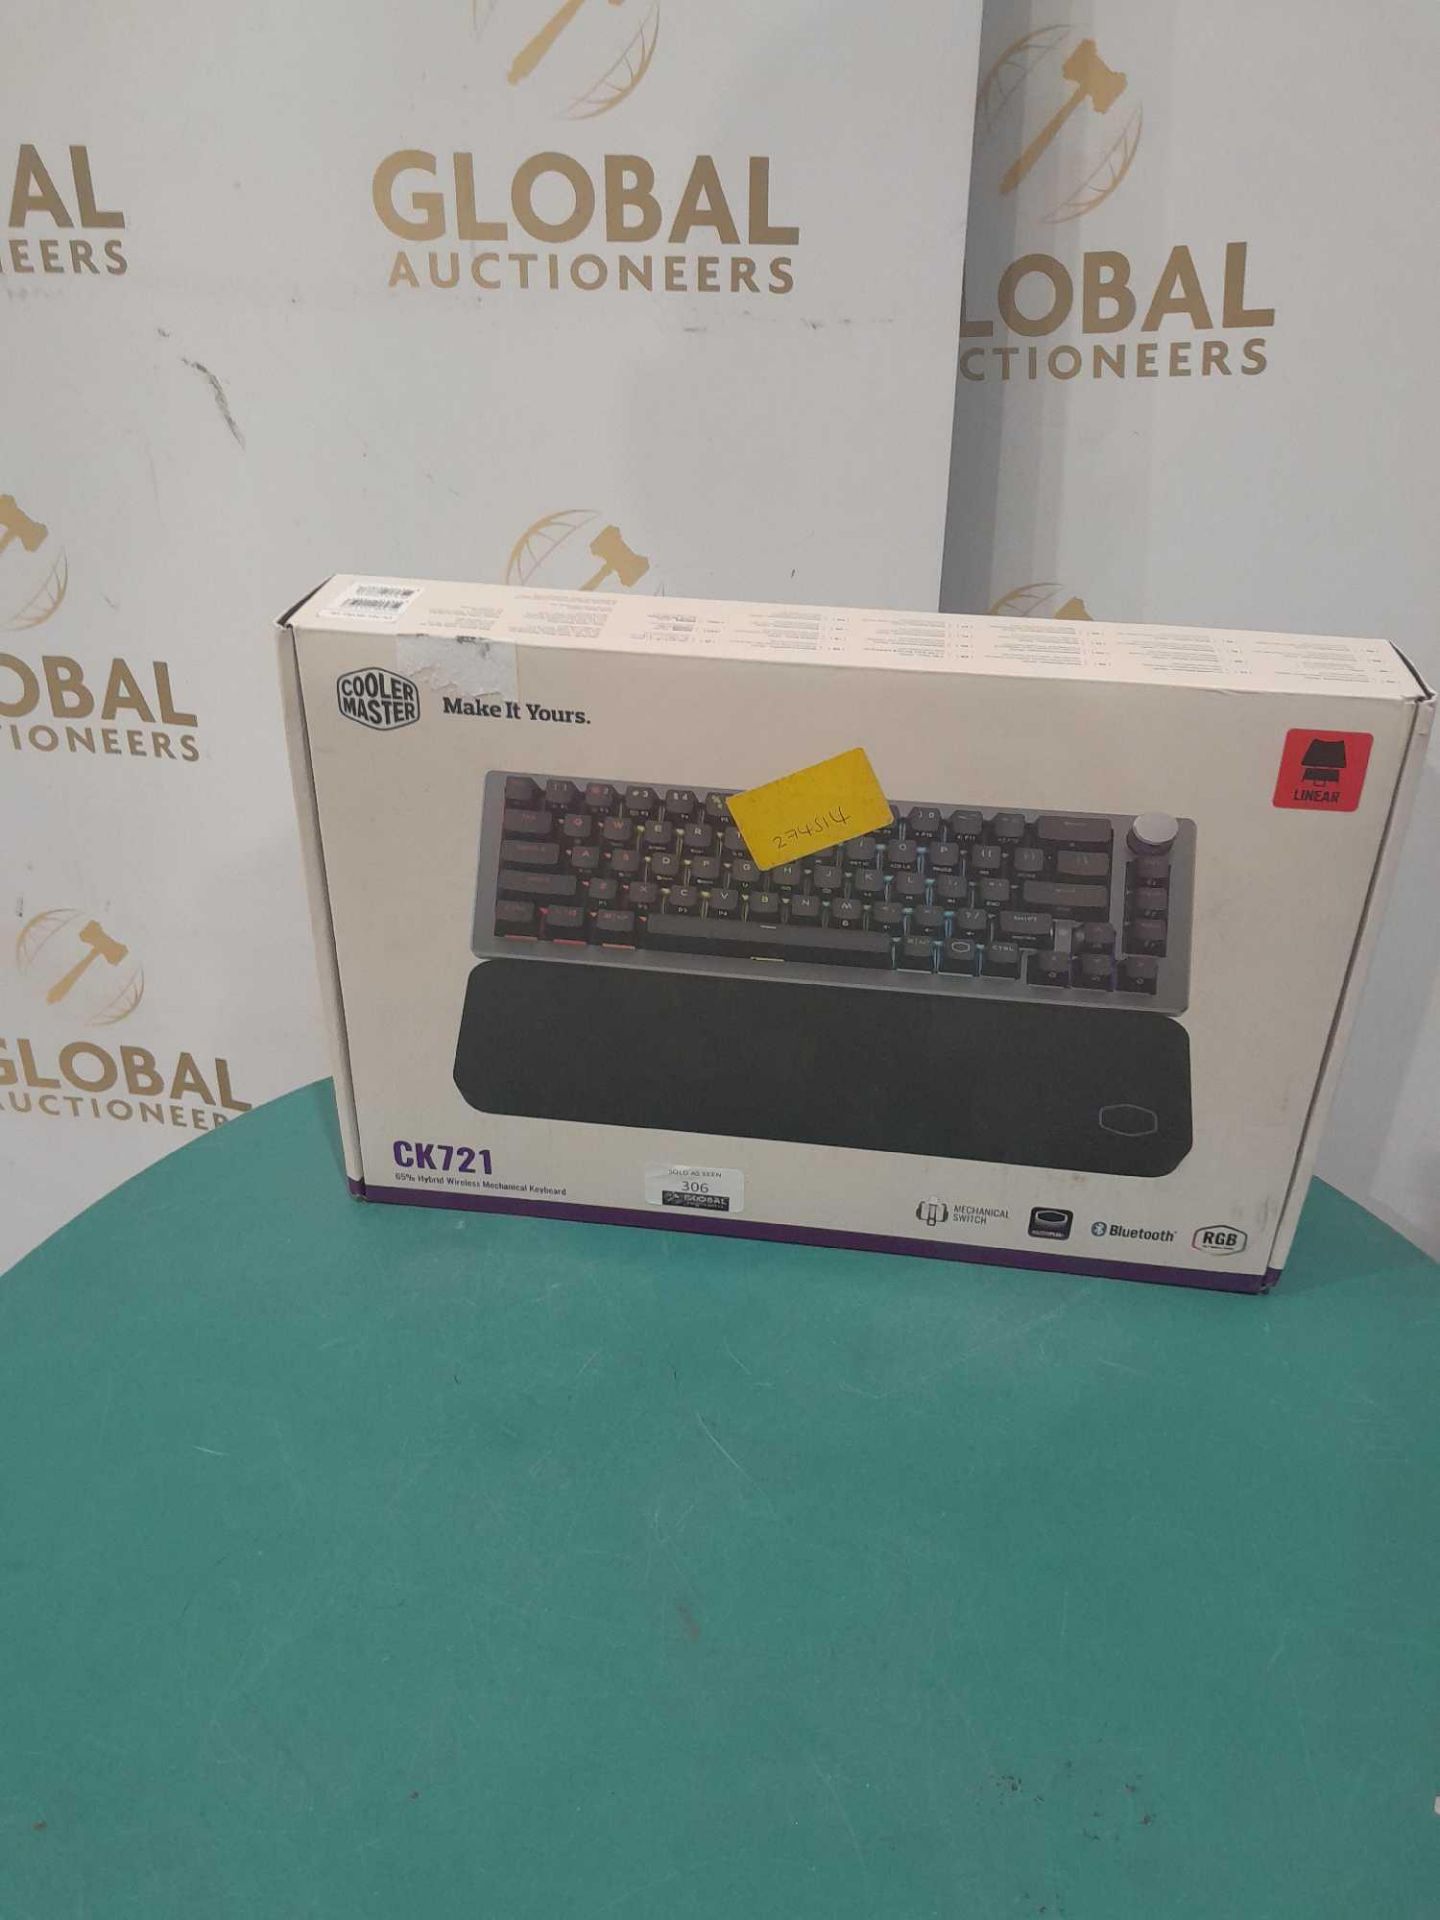 RRP £100 Boxed Cool Master Ck721 Wireless Mechanical Keyboard - Image 2 of 2